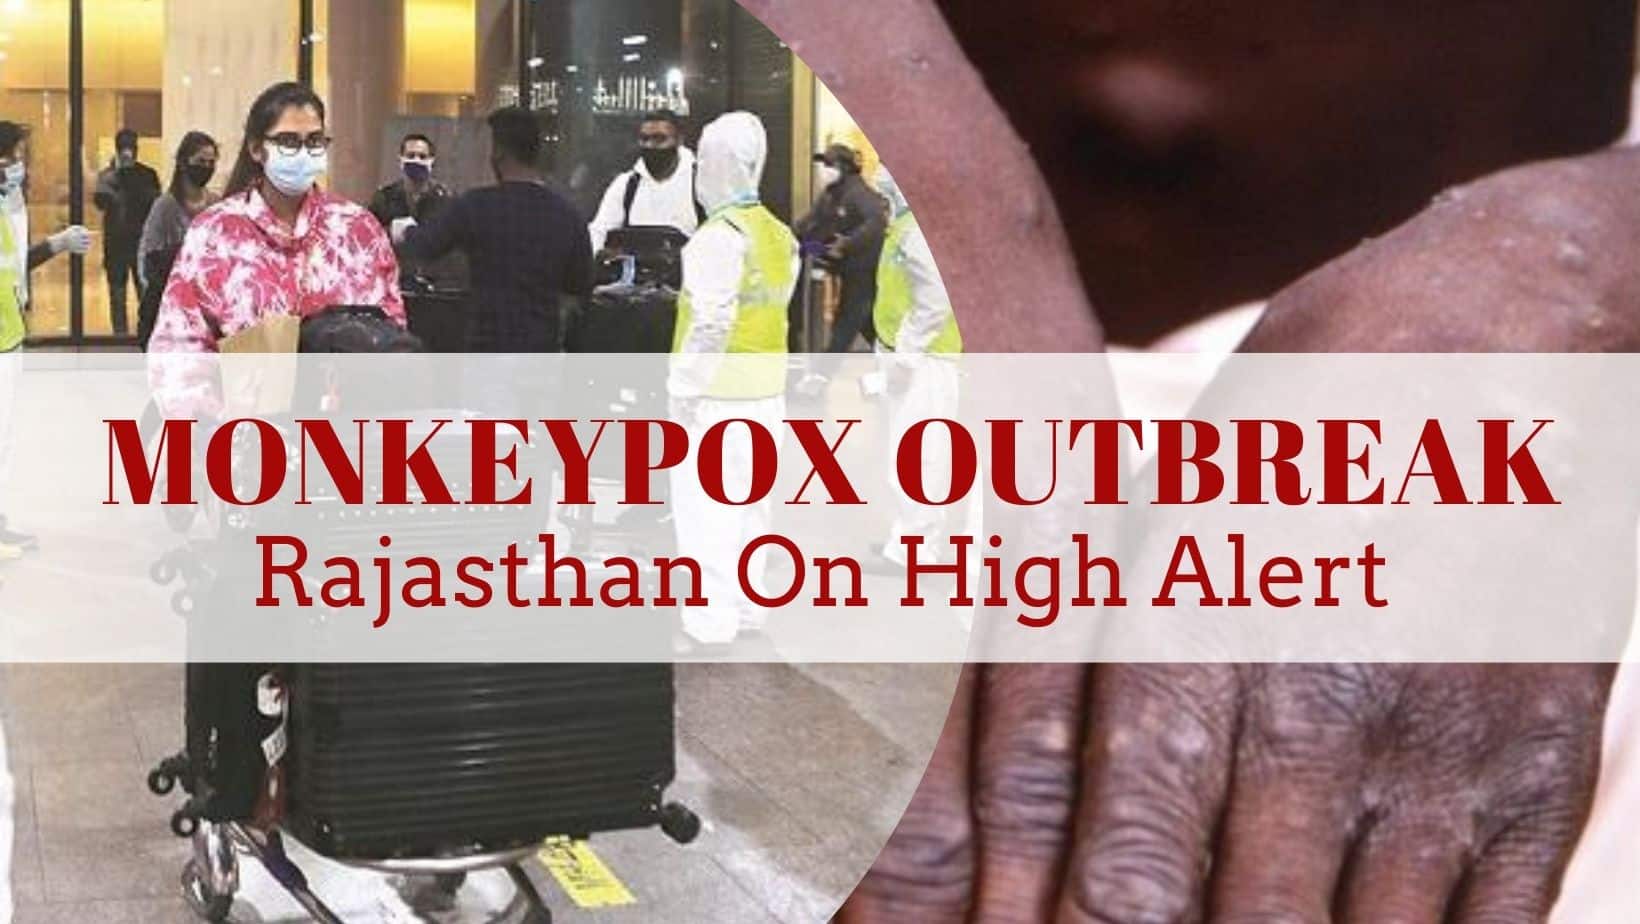 Rajasthan On High Alert Over Monkeypox Outbreak, Advisory Issued For Passengers Travelling From Affected Countries